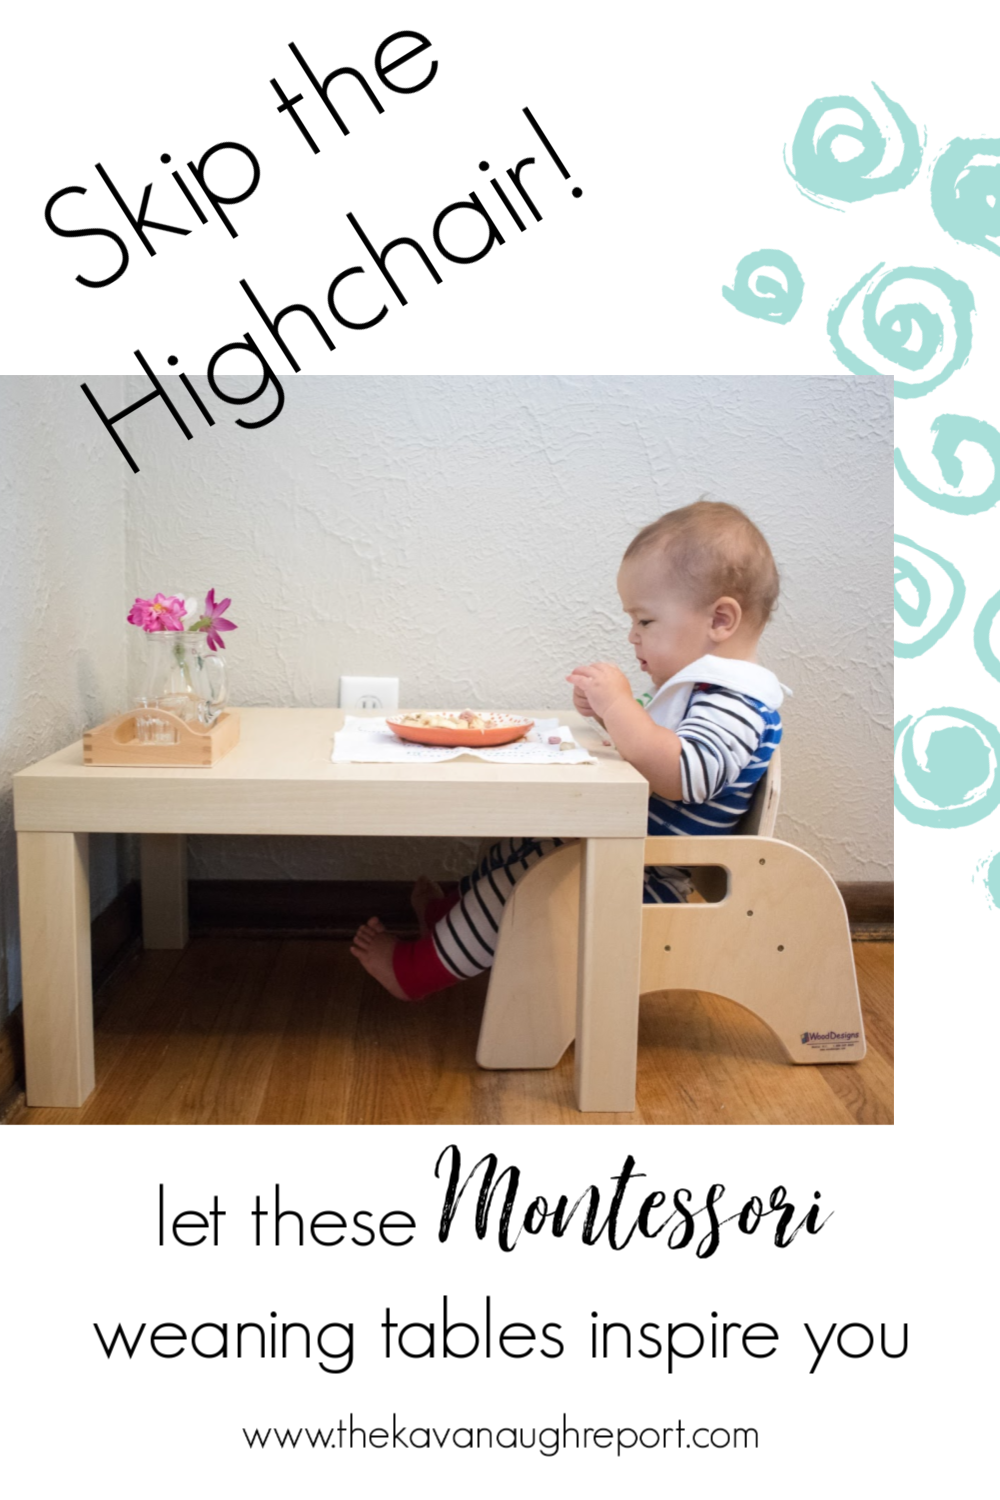 A look at different Montessori home setups for baby eating spaces. These small weaning tables are a perfect baby activity area and provide opportunities for independent eating